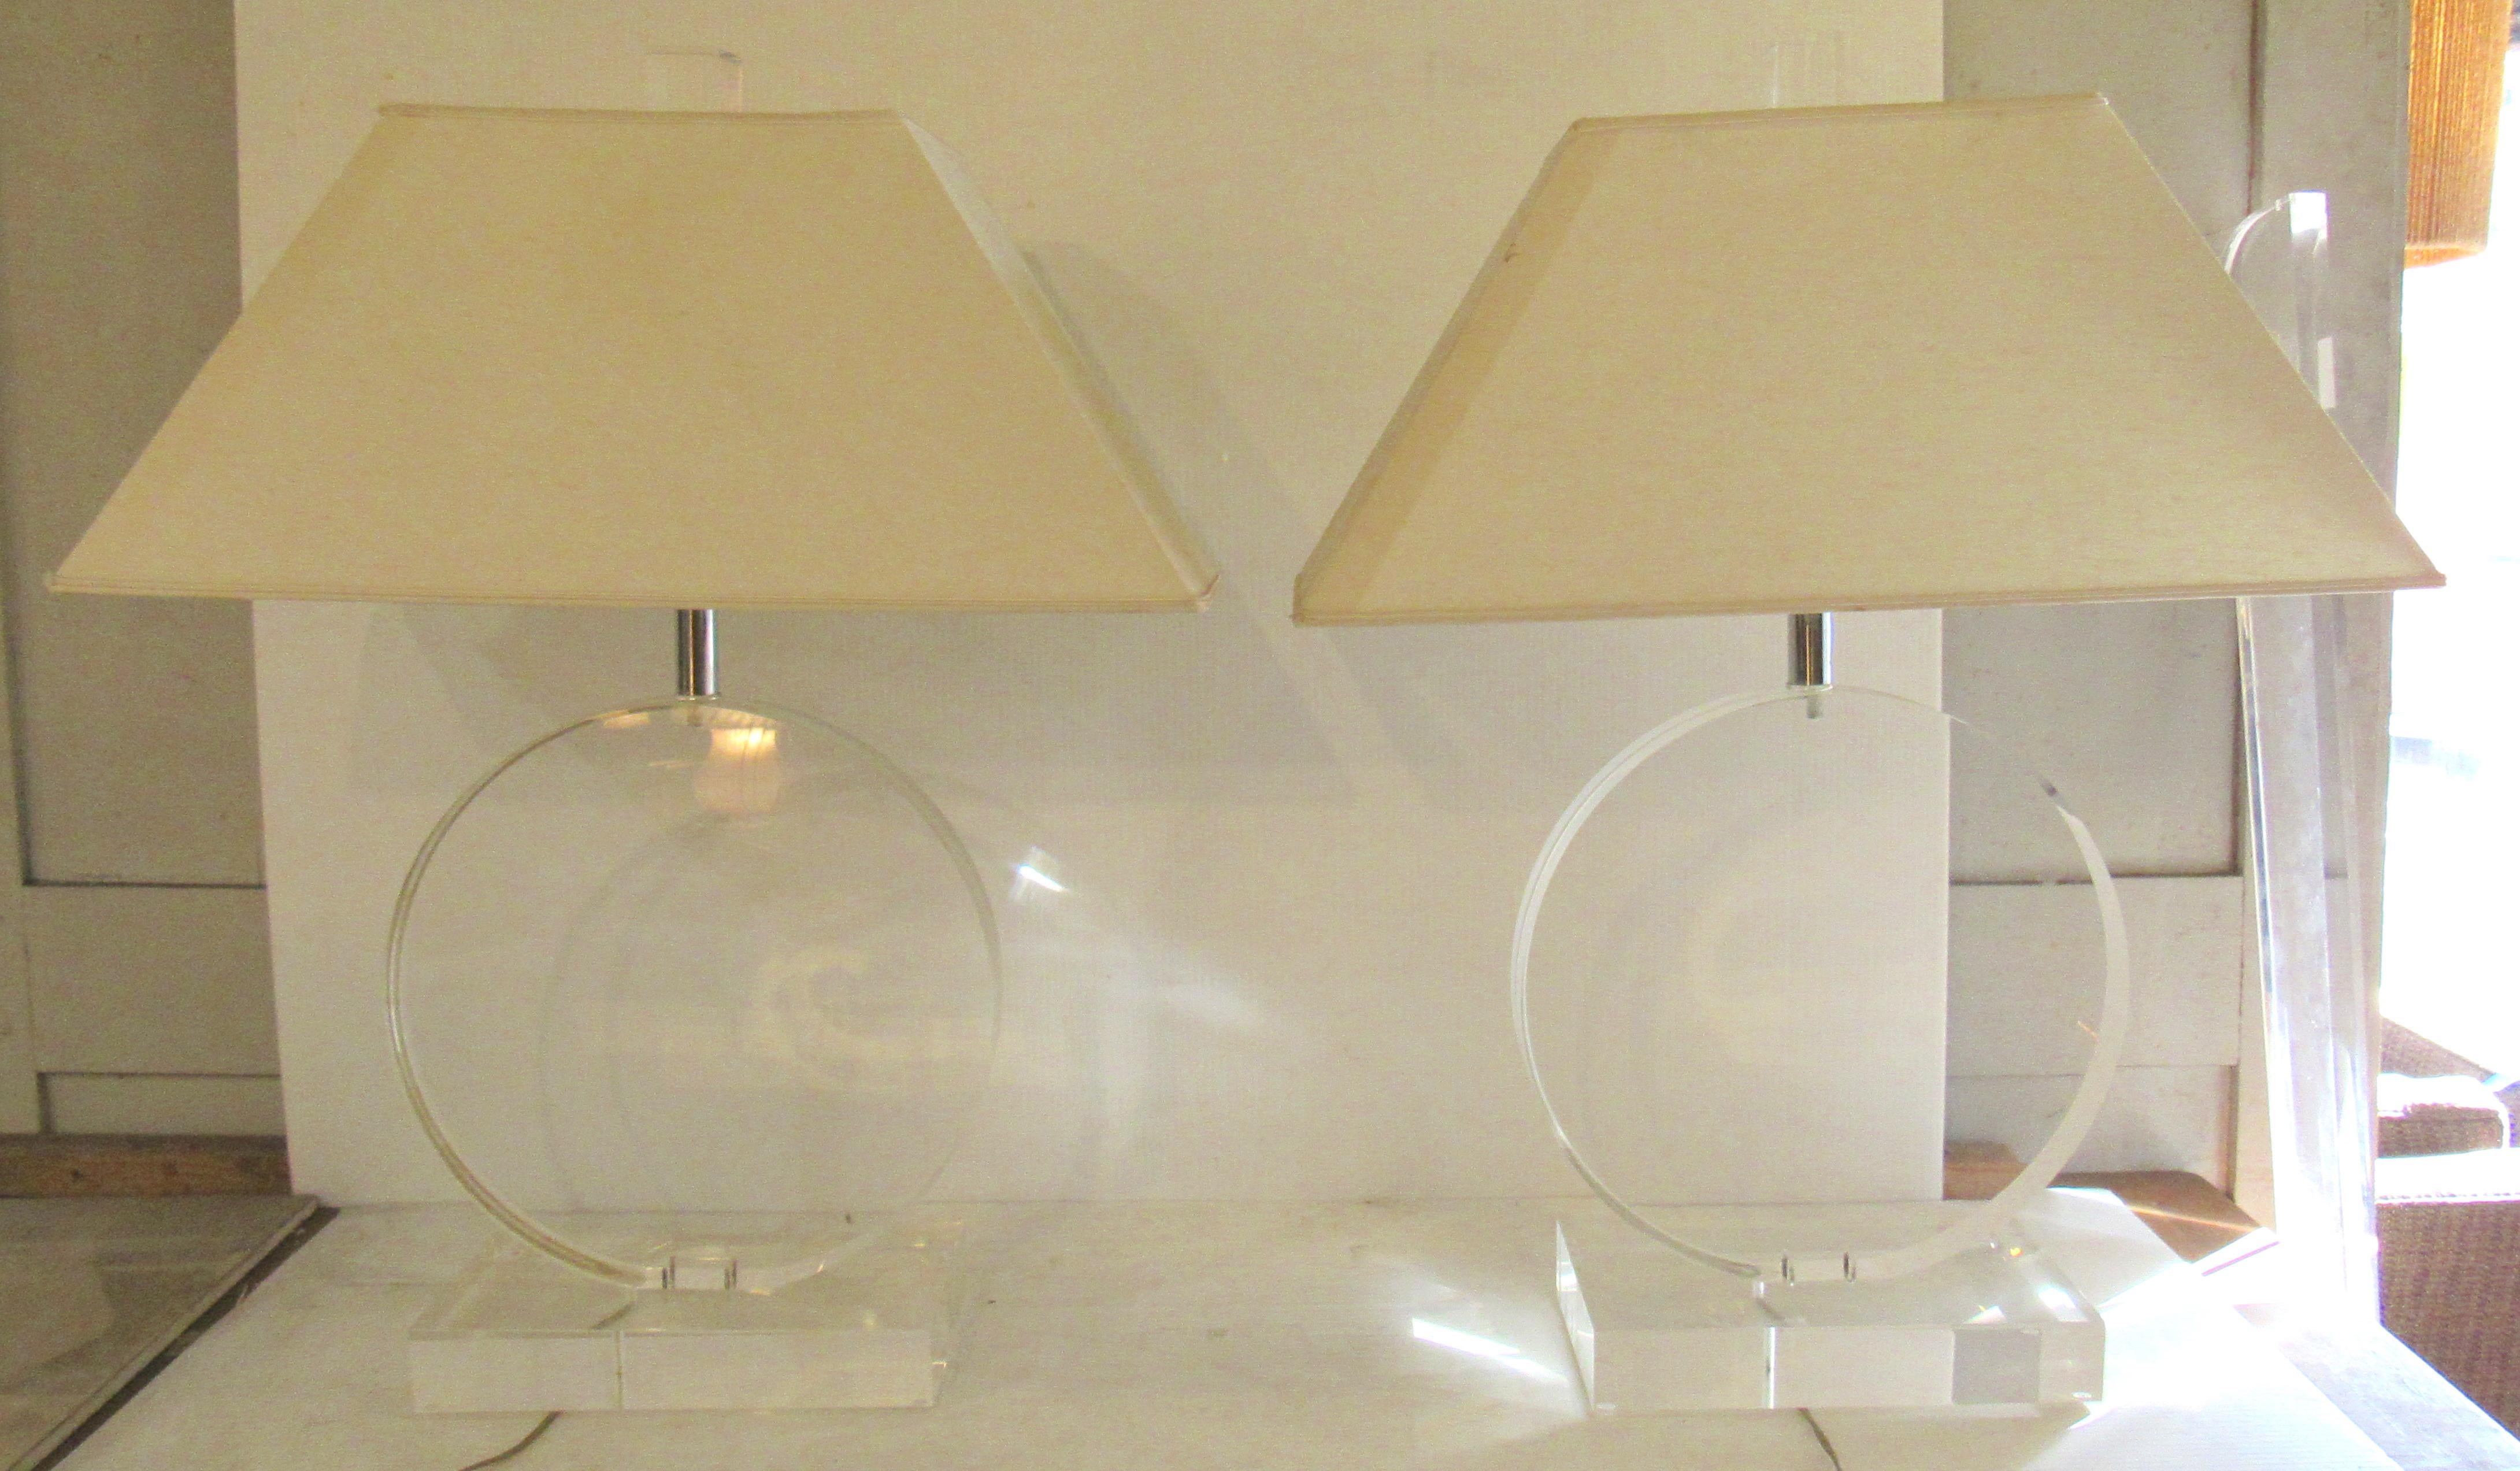 Pair of Mid-Century Modern table lamps made of thick clear Lucite. Wire is hidden on the side of the round base.
Lamp: 14